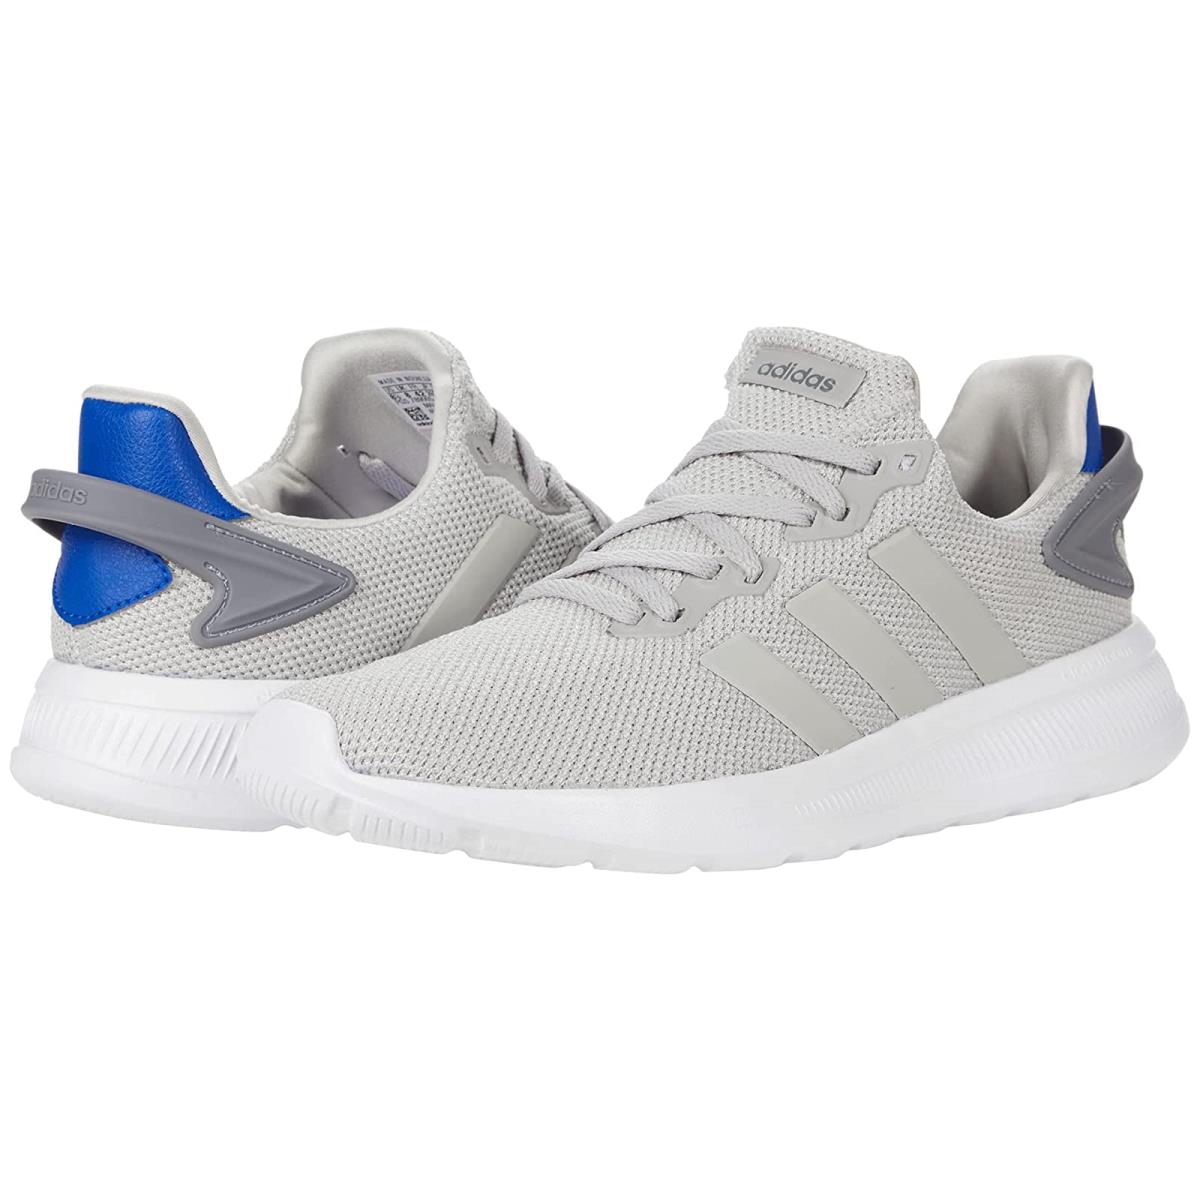 Man`s Sneakers Athletic Shoes Adidas Running Lite Racer Byd 2.0 Grey/Grey One/Team Royal Blue